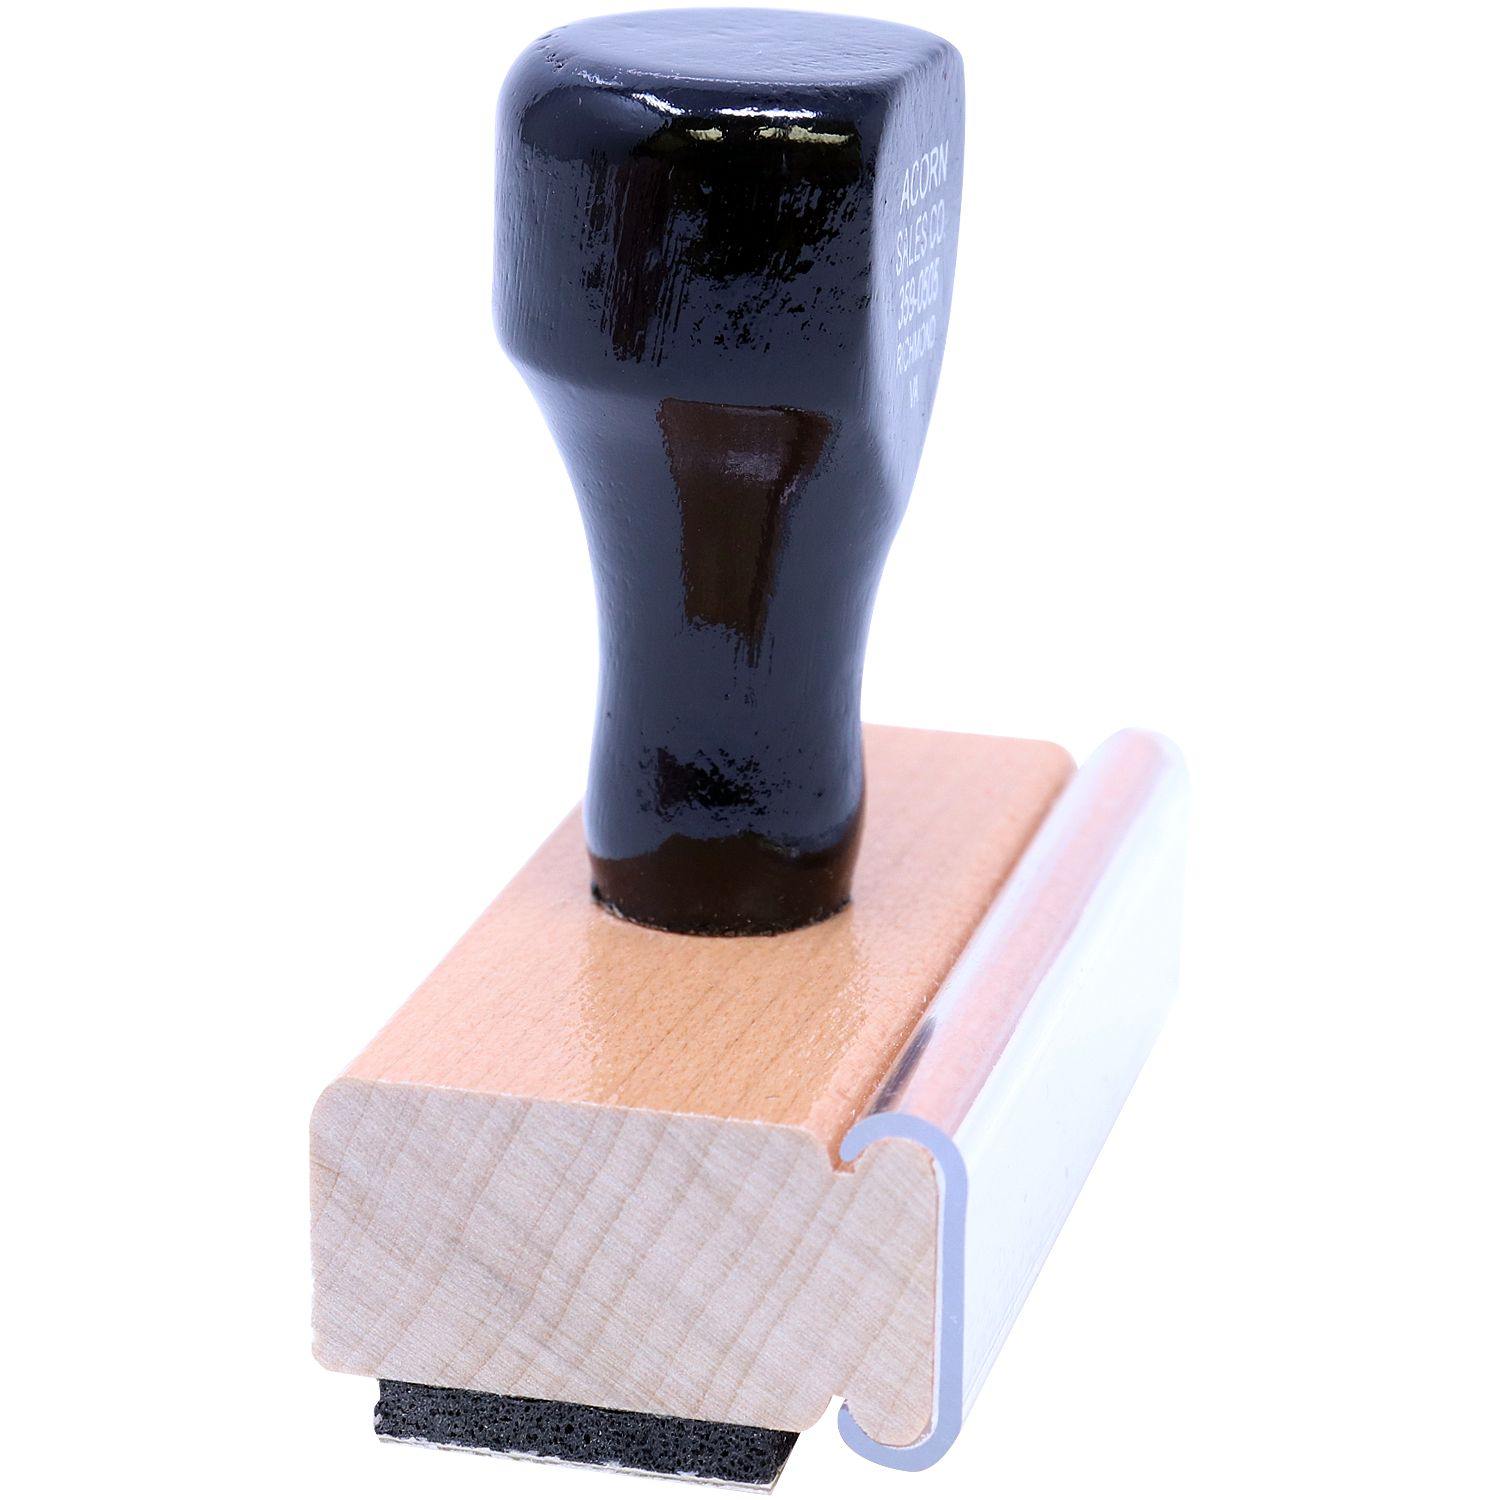 Side View of Client's Copy Rubber Stamp at an Angle